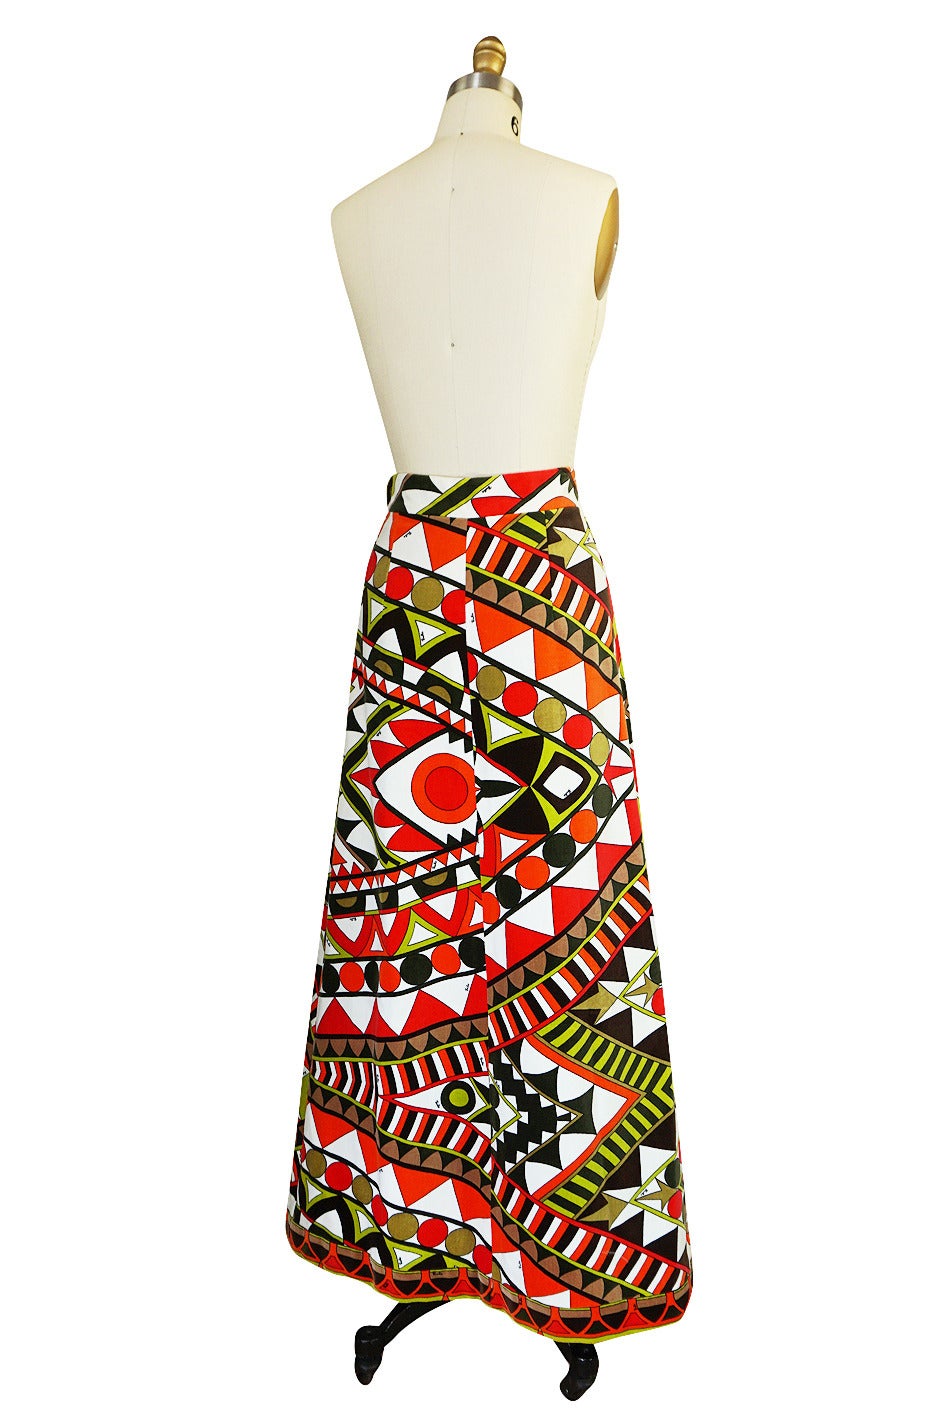 I think one of my favorite vintage pieces is the full length maxi skirts by Pucci. And the velvet ones like this one are the dreamiest. You can throw them on with just about anything topping them and it works. The prints are so vibrant and bright